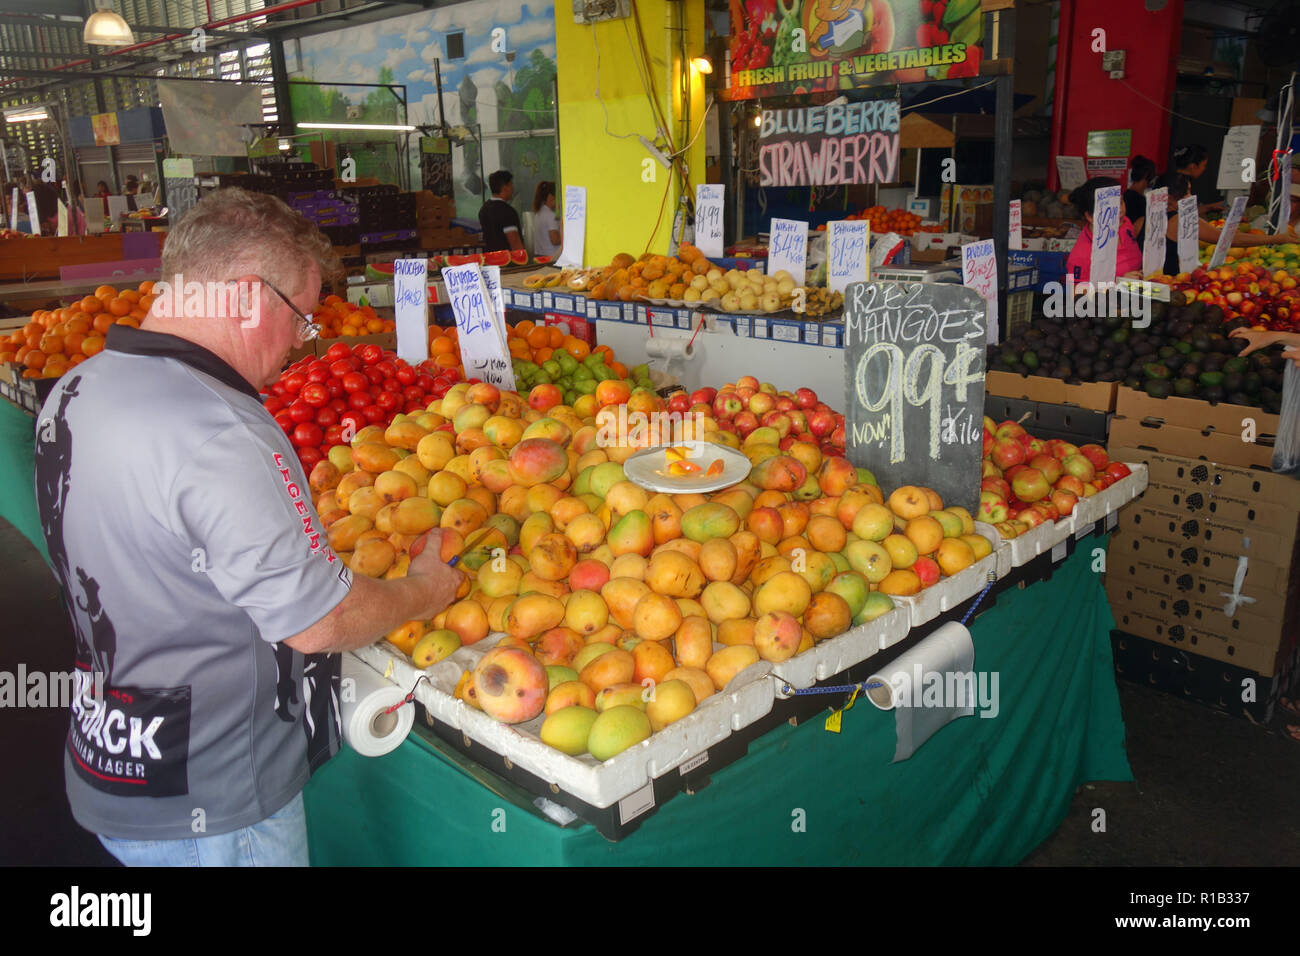 Mangoes going cheap at just 99 cents per kilo, Rustys Markets, Cairns, Queensland, Australia. No MR or PR Stock Photo